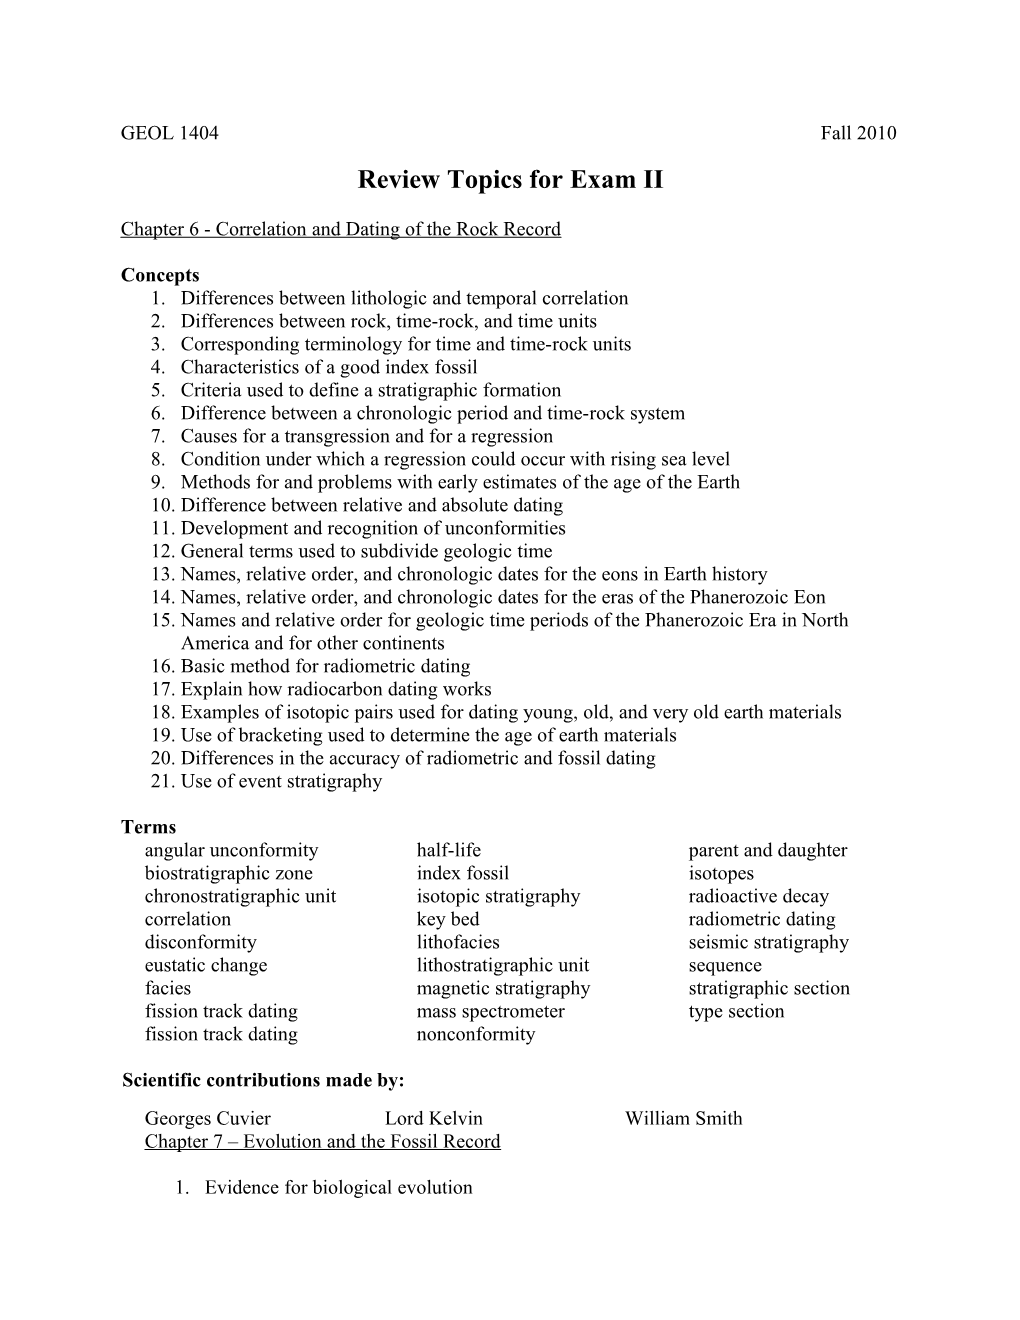 Review Topics for Exam II